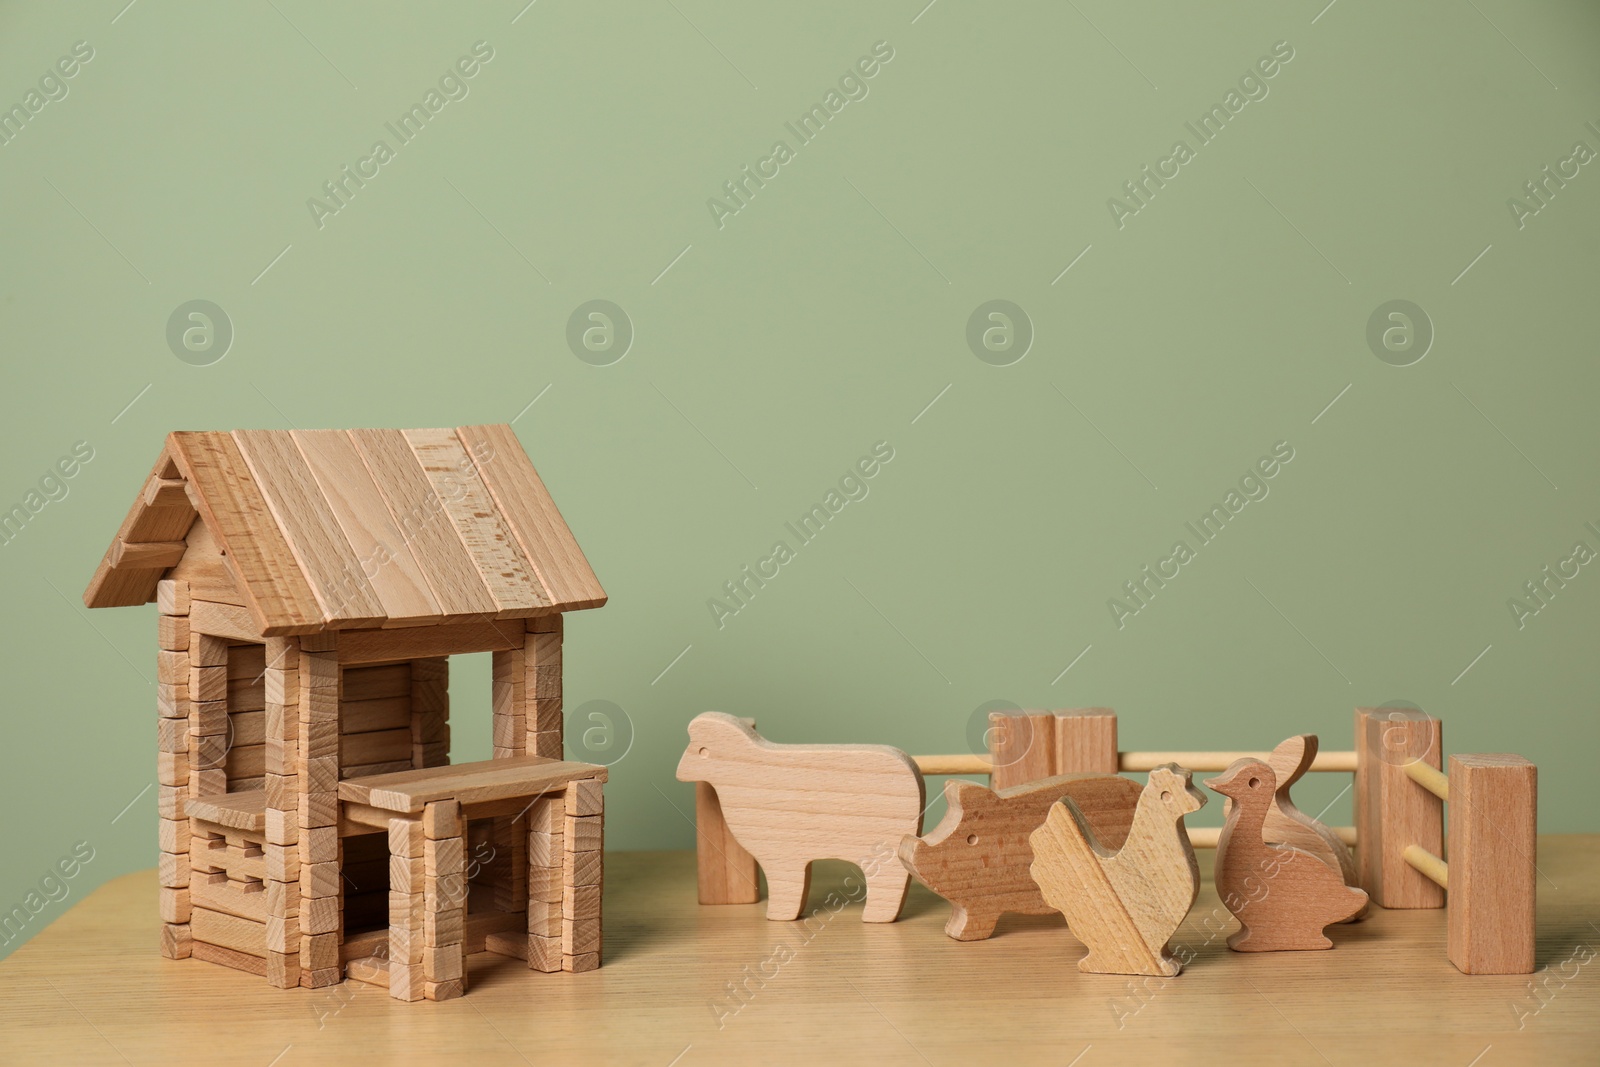 Photo of Wooden house, animals and fence on table near olive wall, space for text. Children's toys